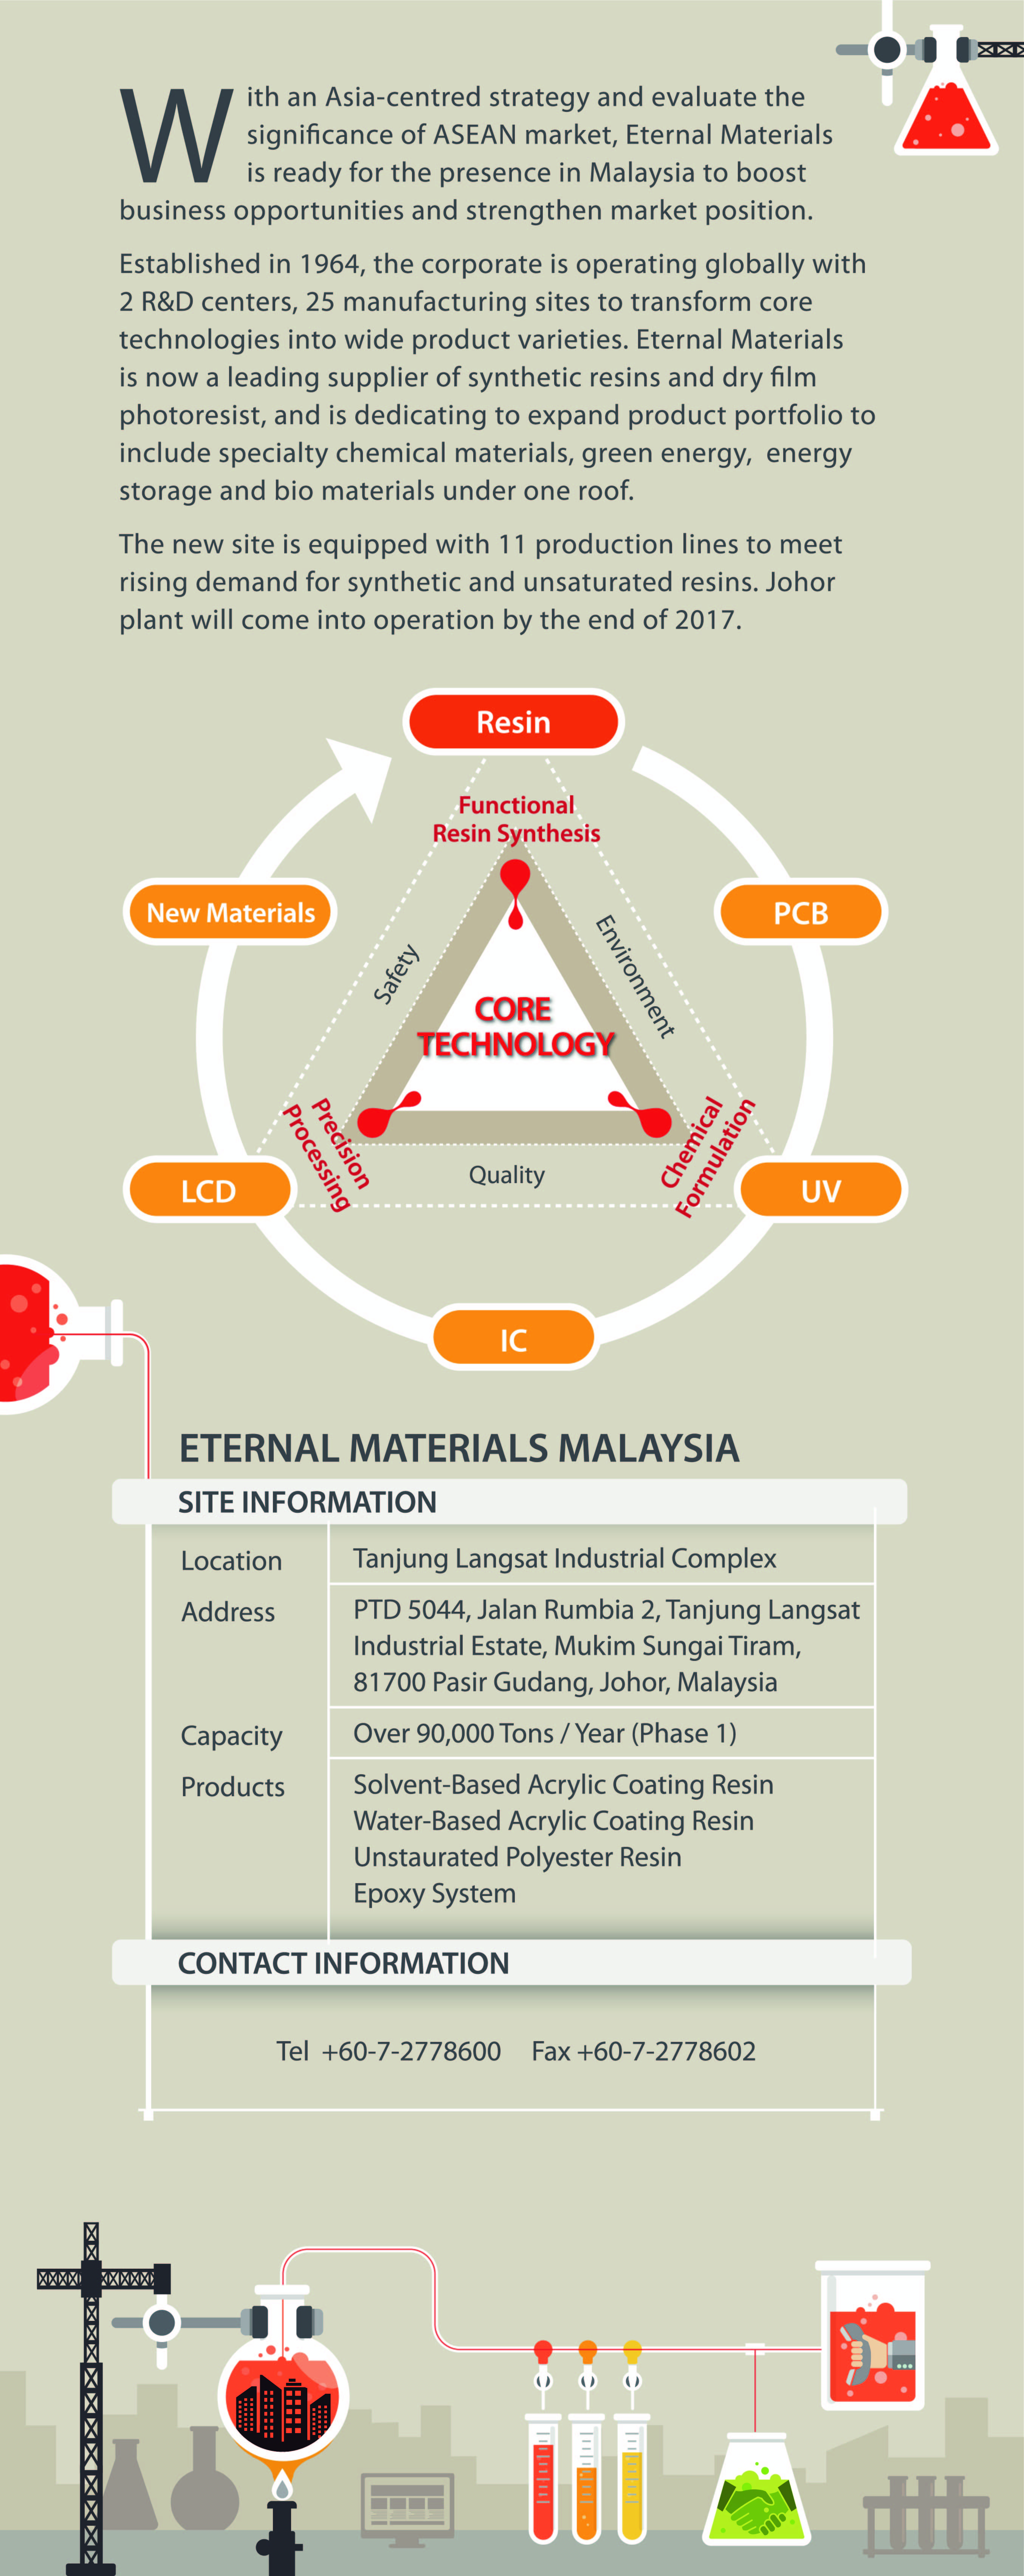 Eternal Materials Opens New Production Site in Johor, Malaysia